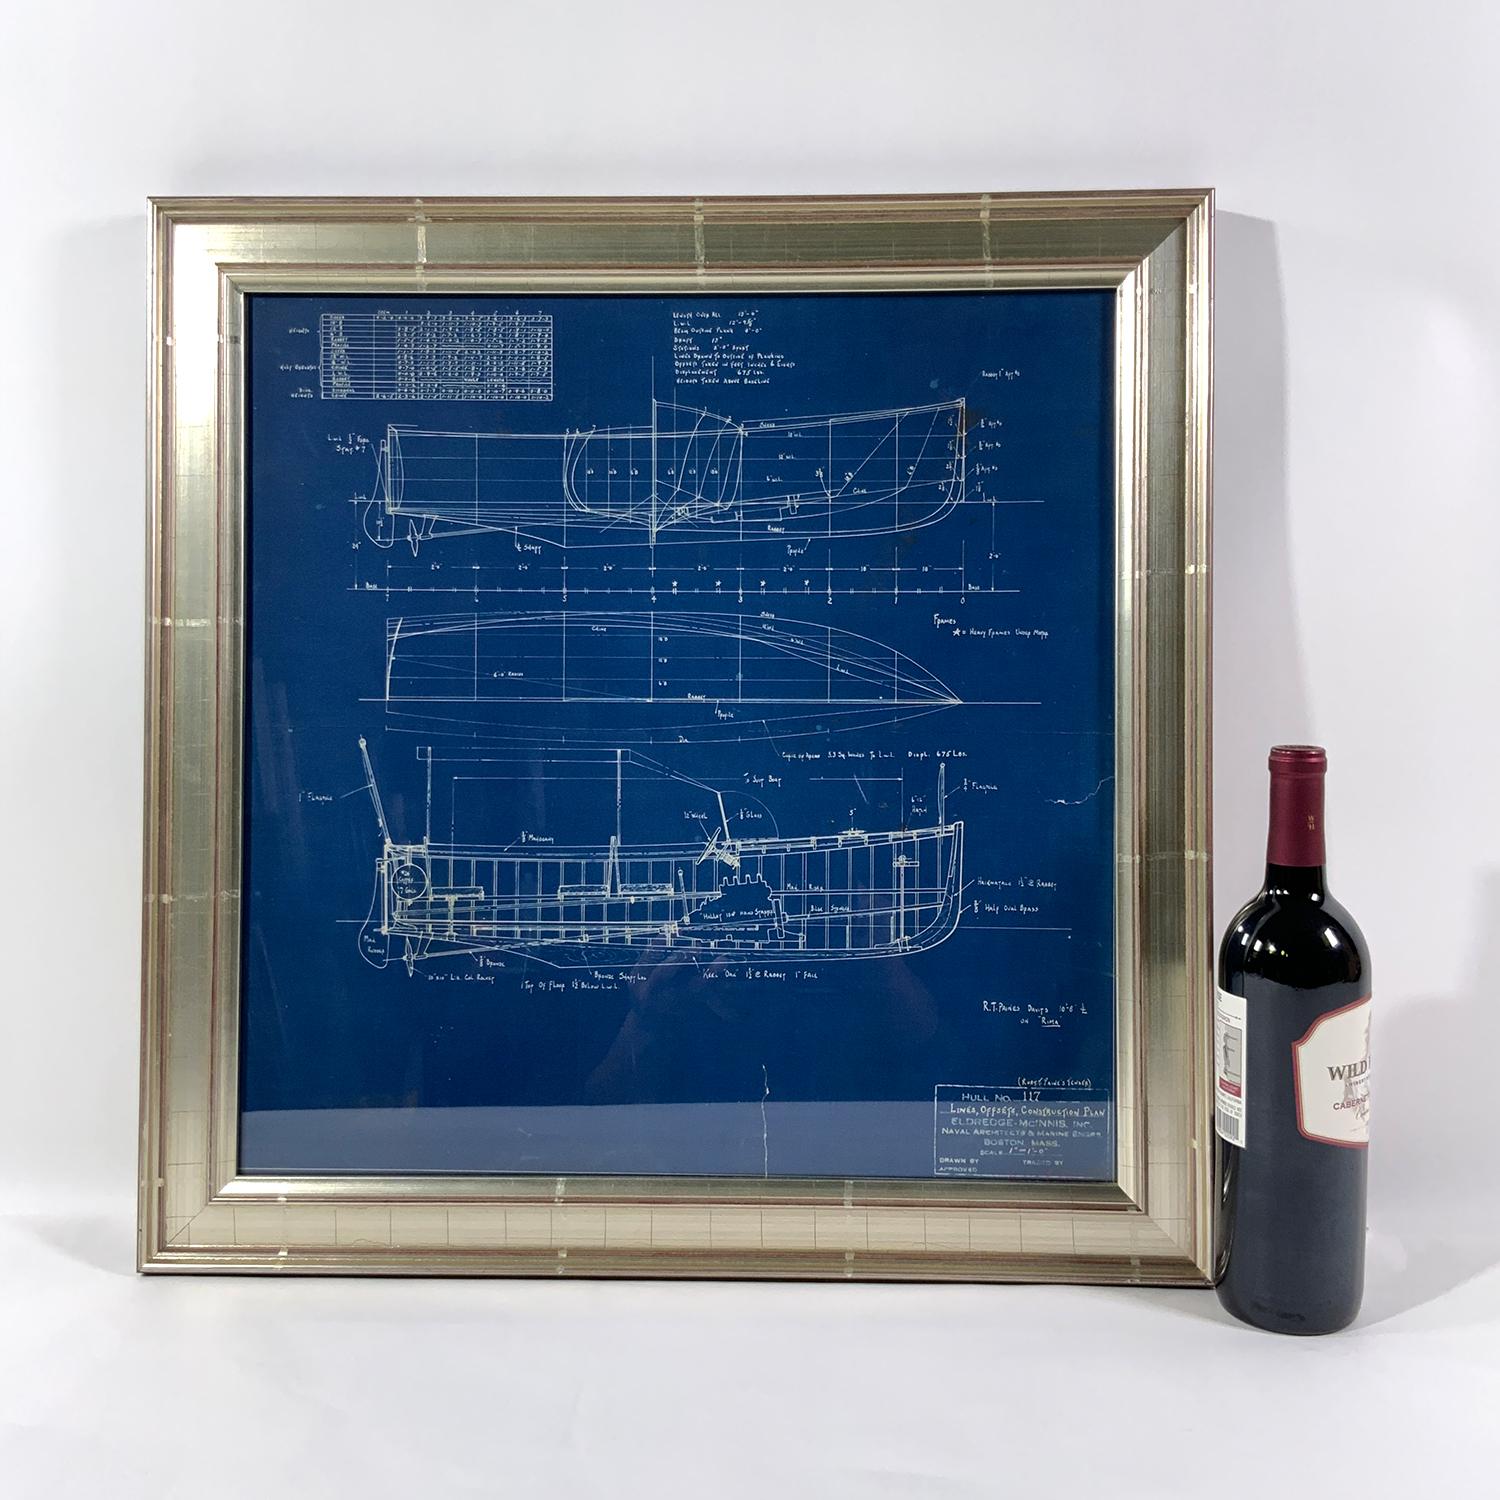 North American Charming Original Blueprint for Yacht Tender Onboard Yacht Rima For Sale